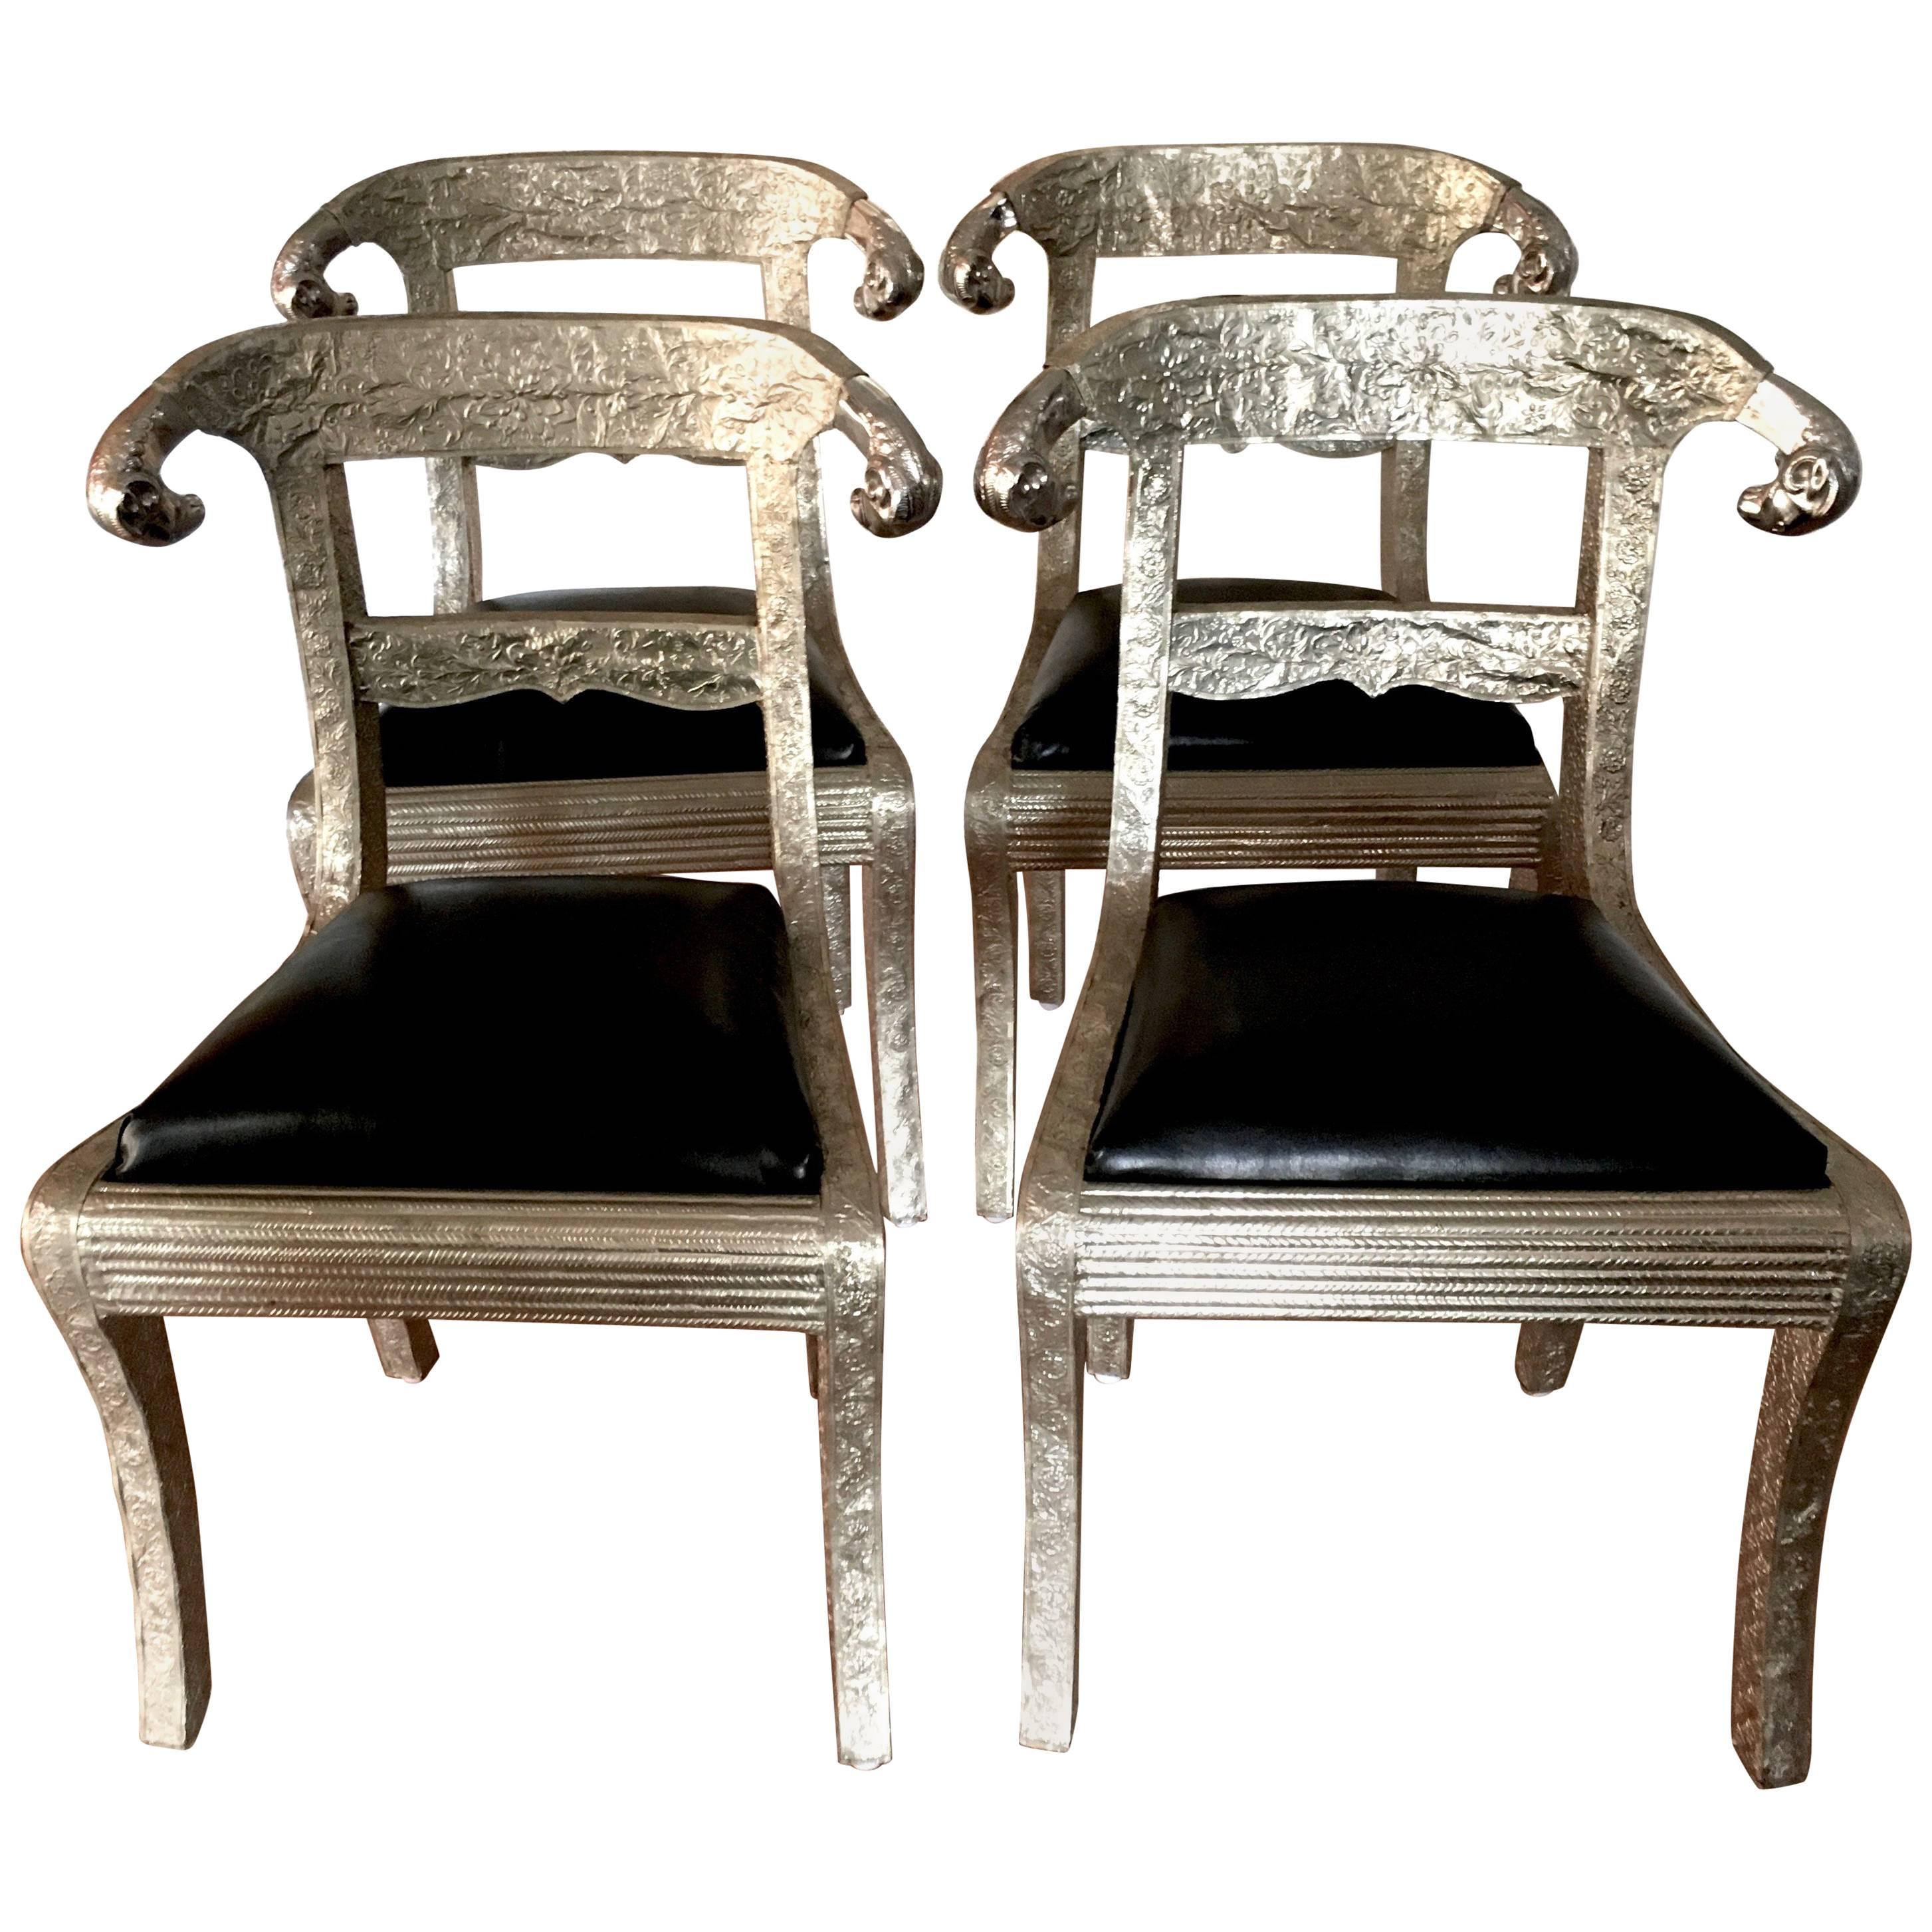 Four Silver Indian Wedding Chairs